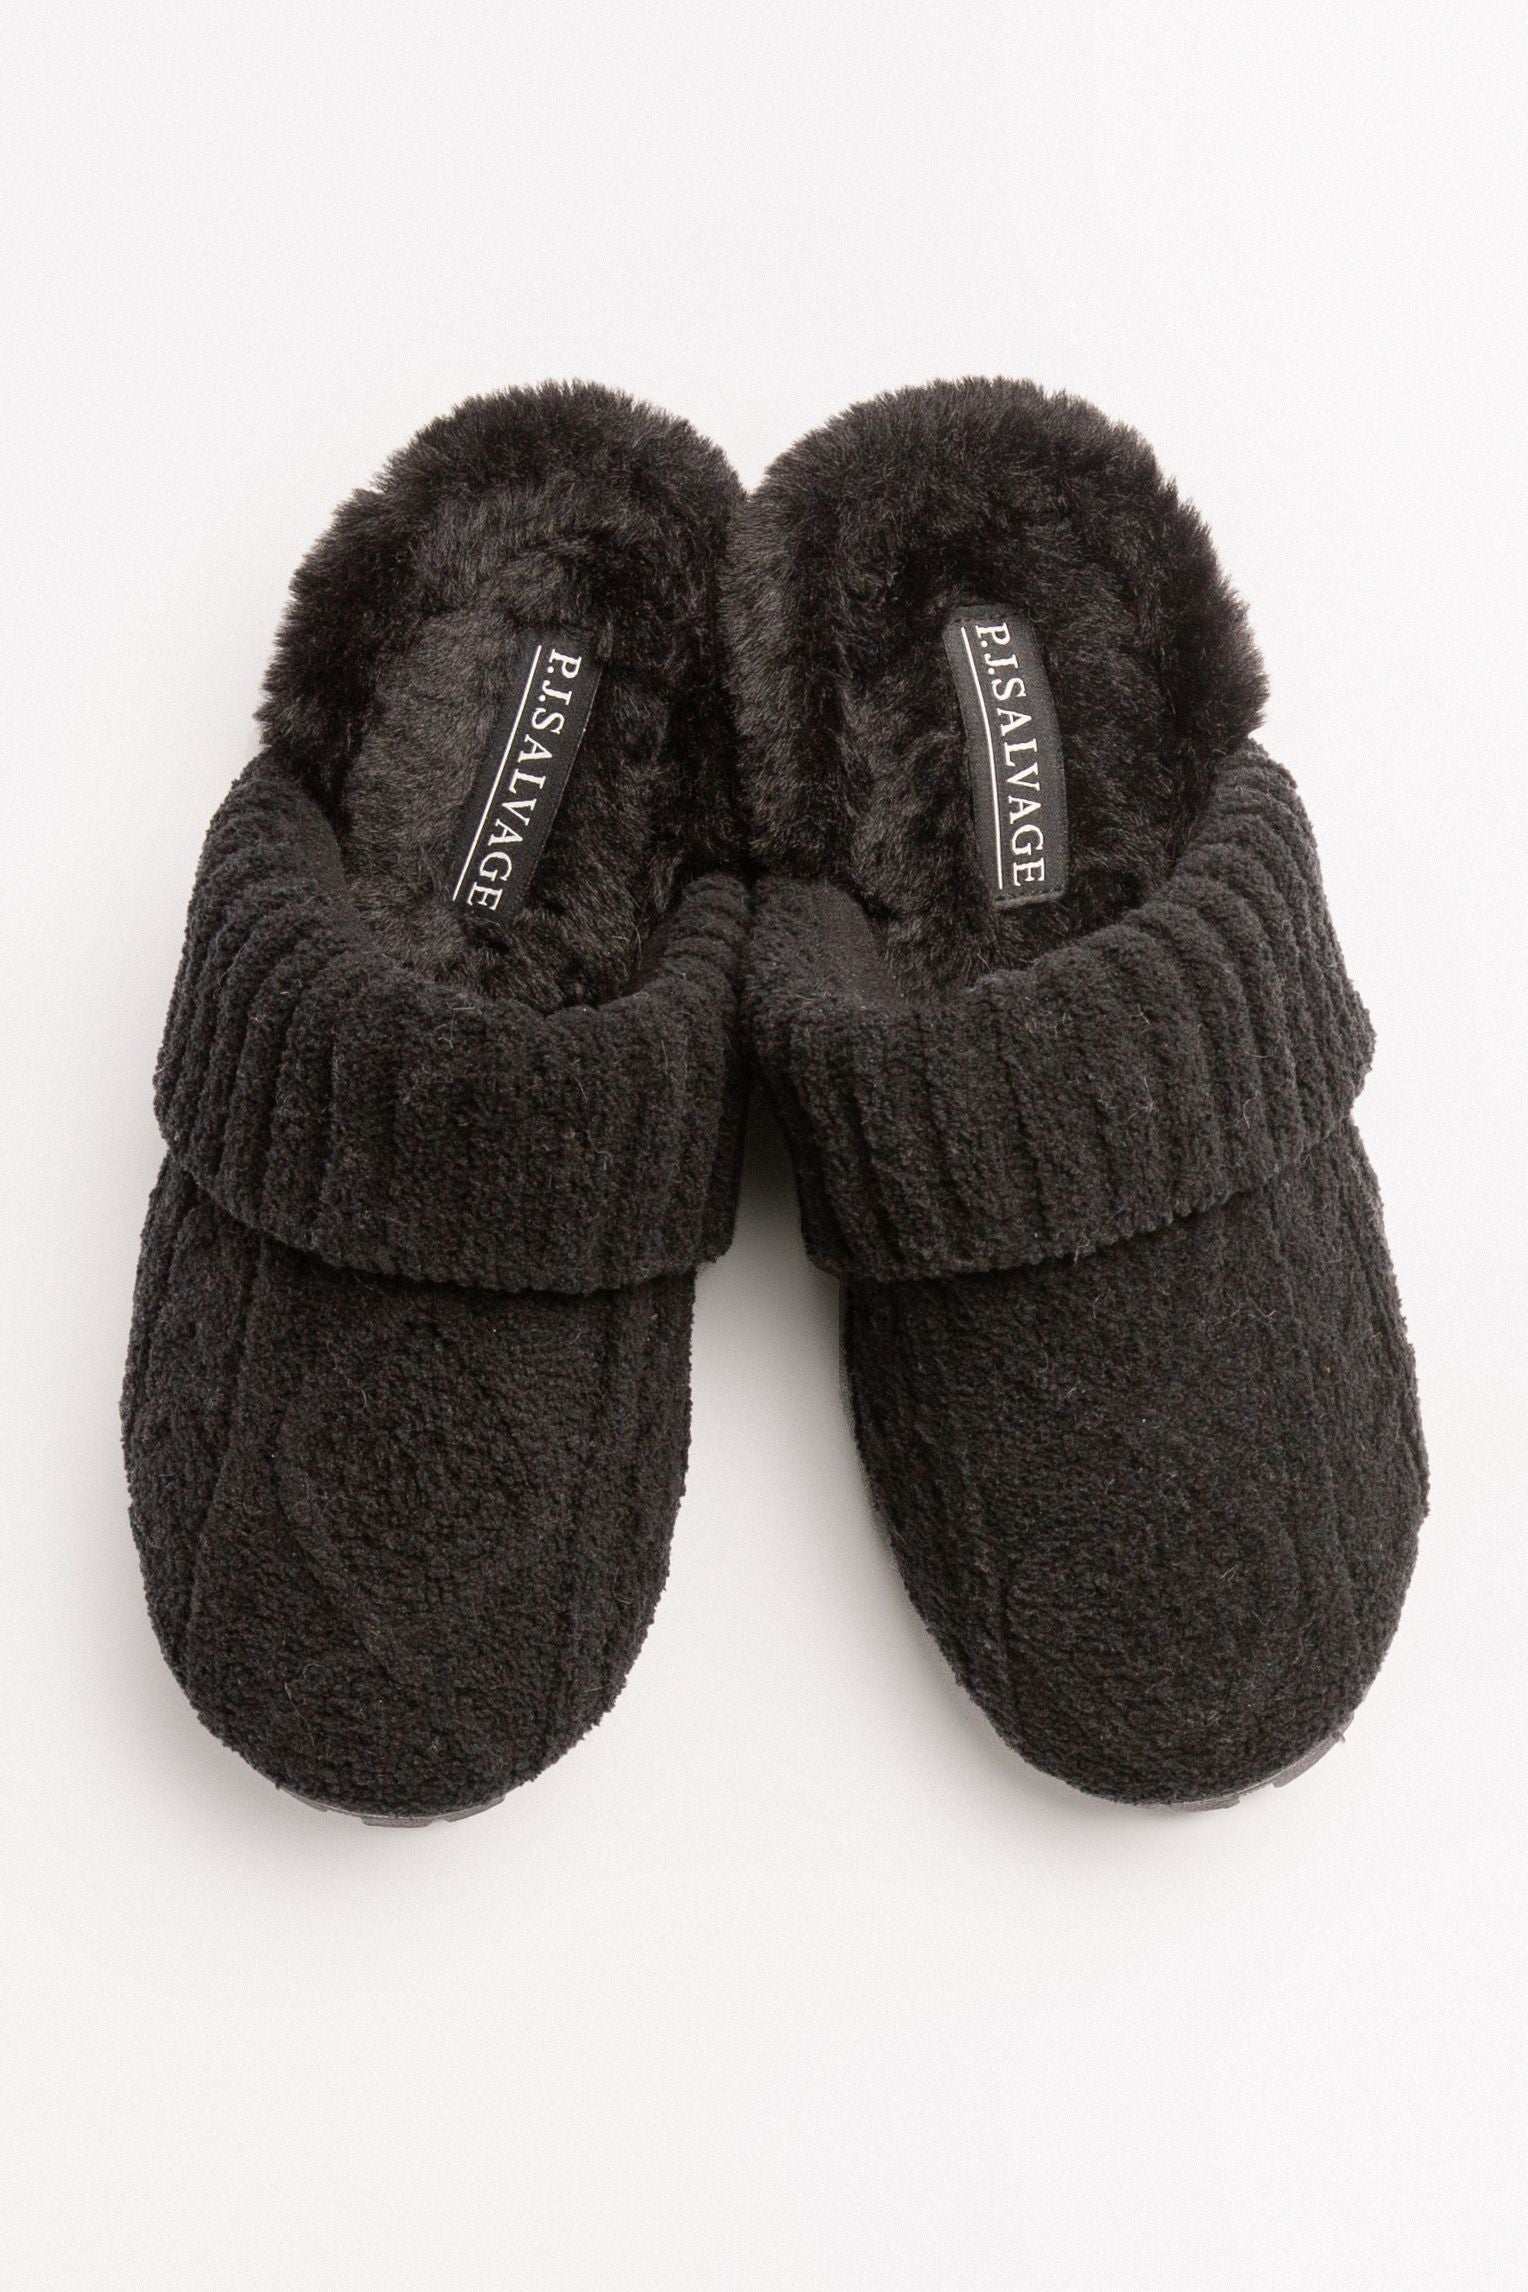 P.J. Salvage Cable Knit Slide Small Black